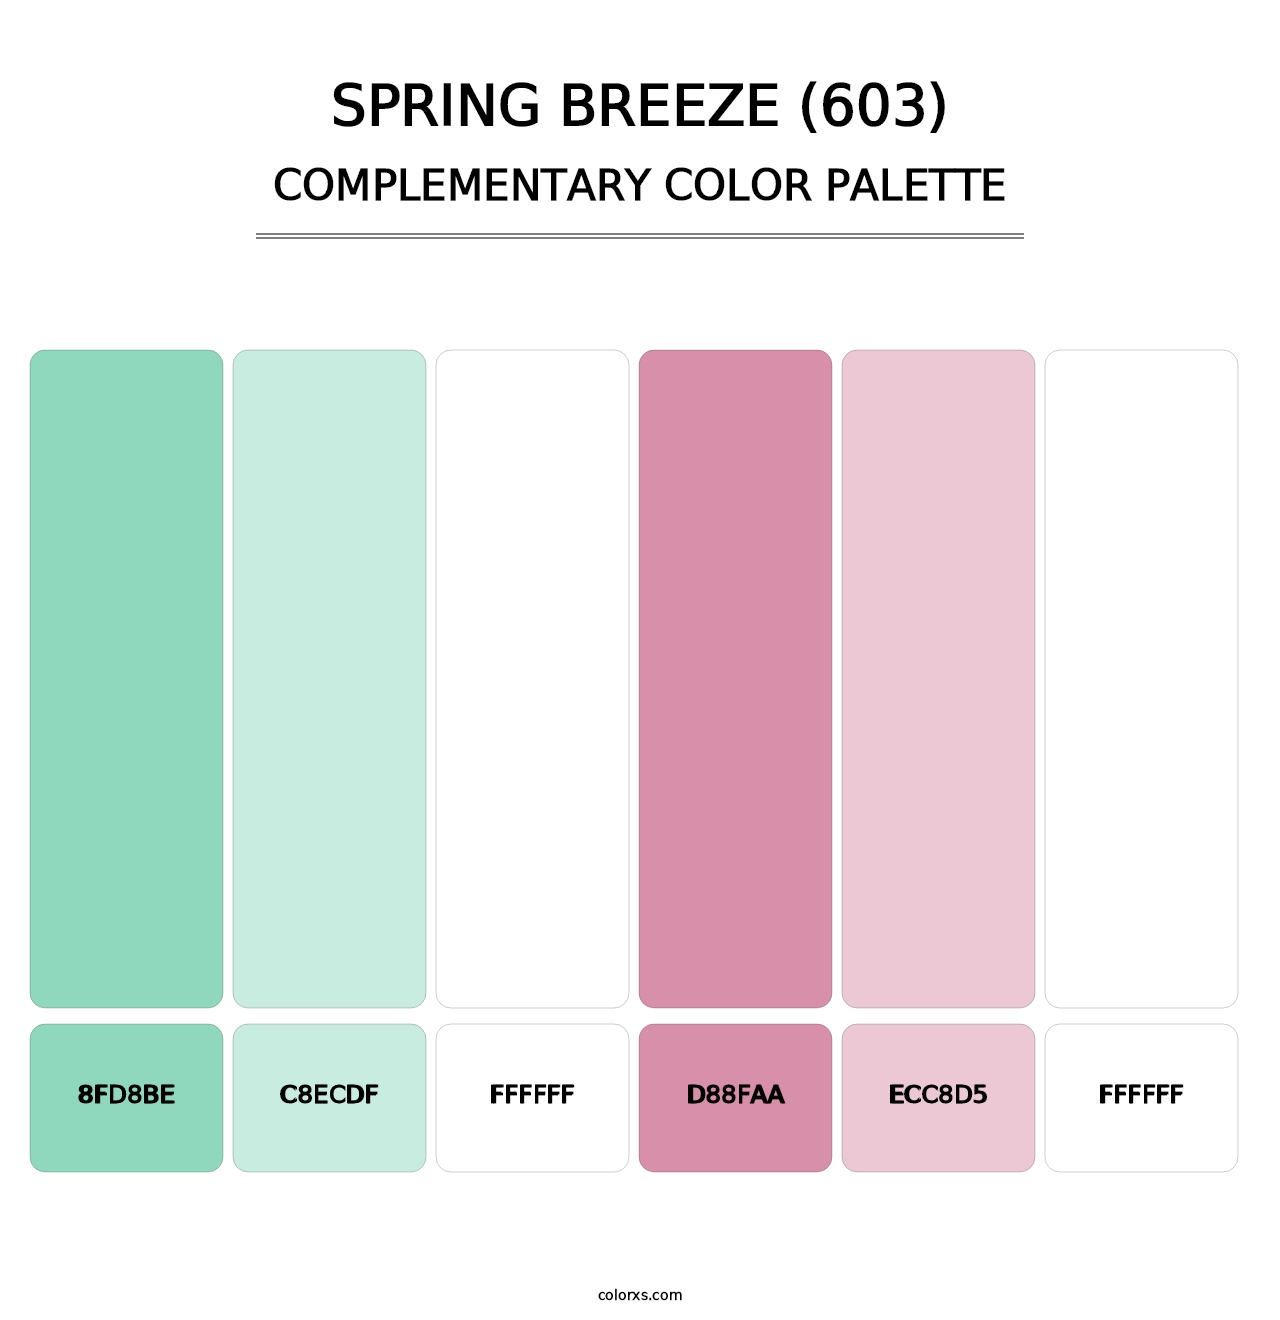 Spring Breeze (603) - Complementary Color Palette